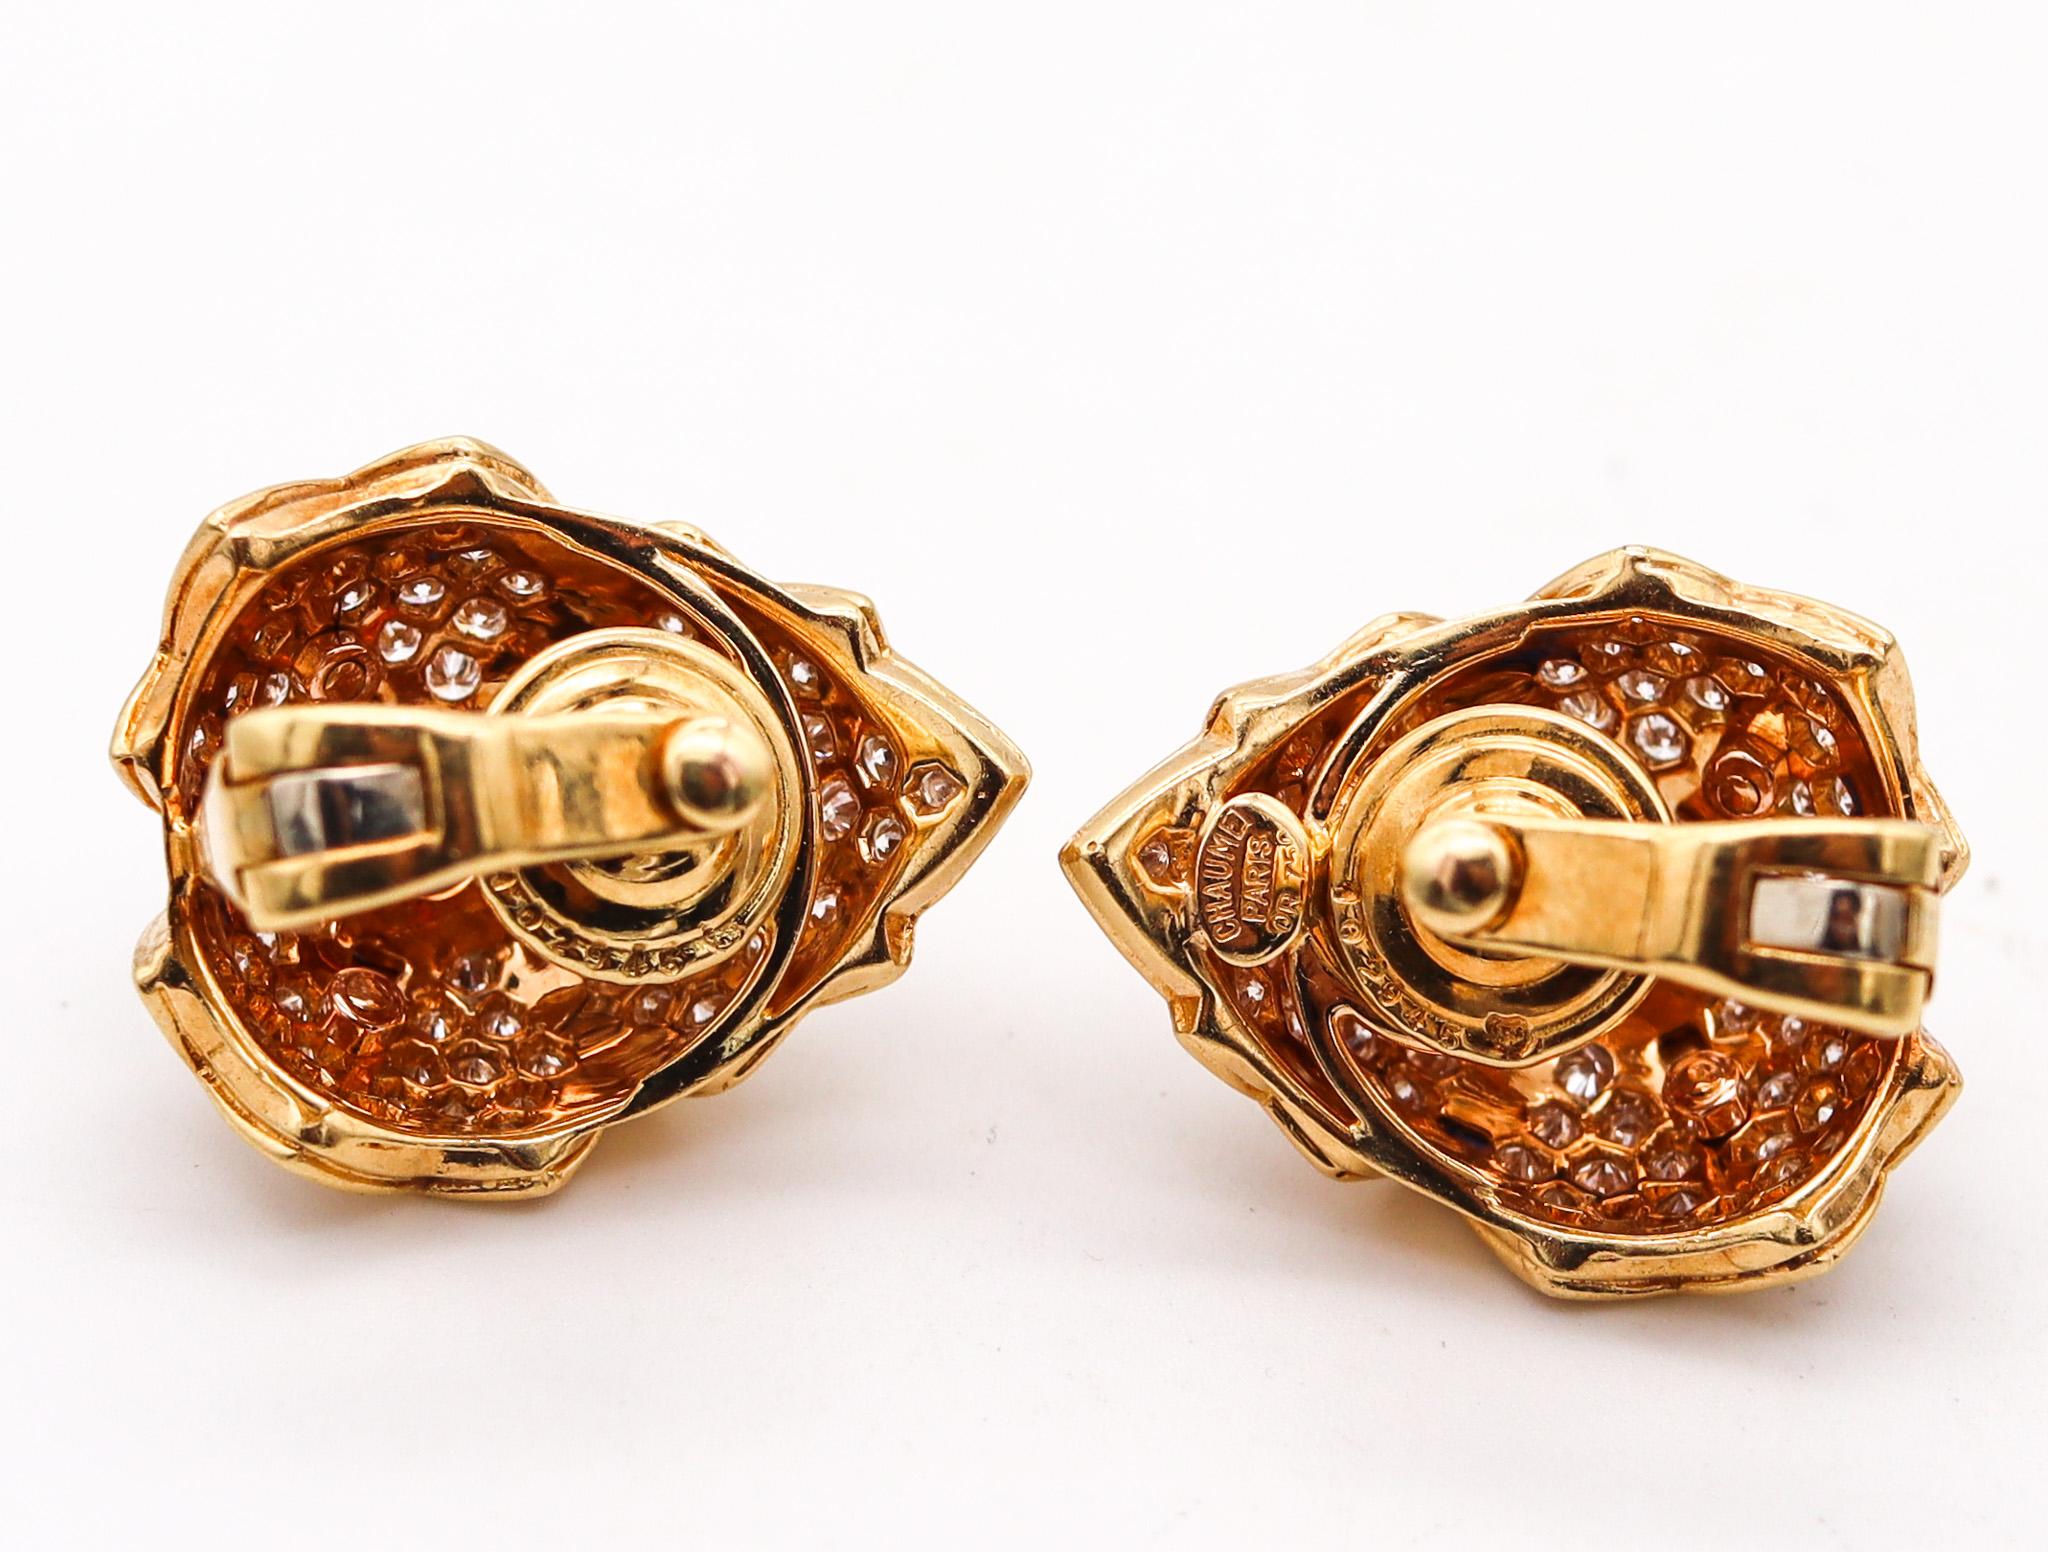 Cabochon Chaumet Paris Clip On Earrings In 18Kt Gold With 5.64 Ctw Sapphires & Diamonds For Sale